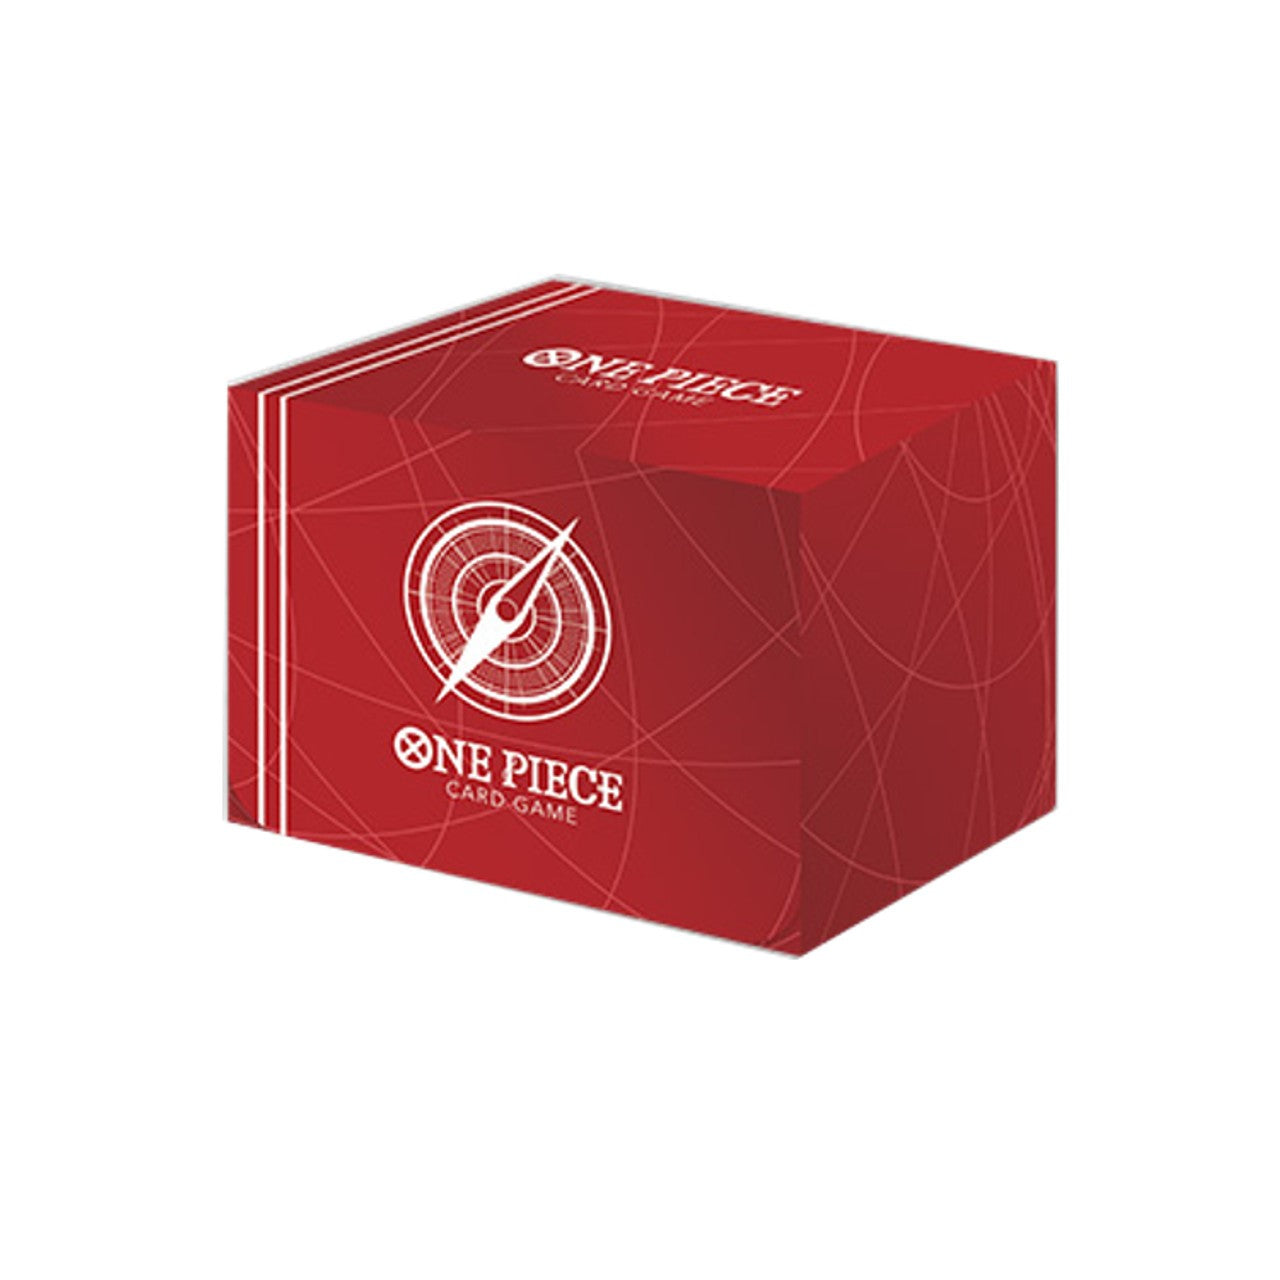 ONE PIECE CARD GAME RED DECK BOX